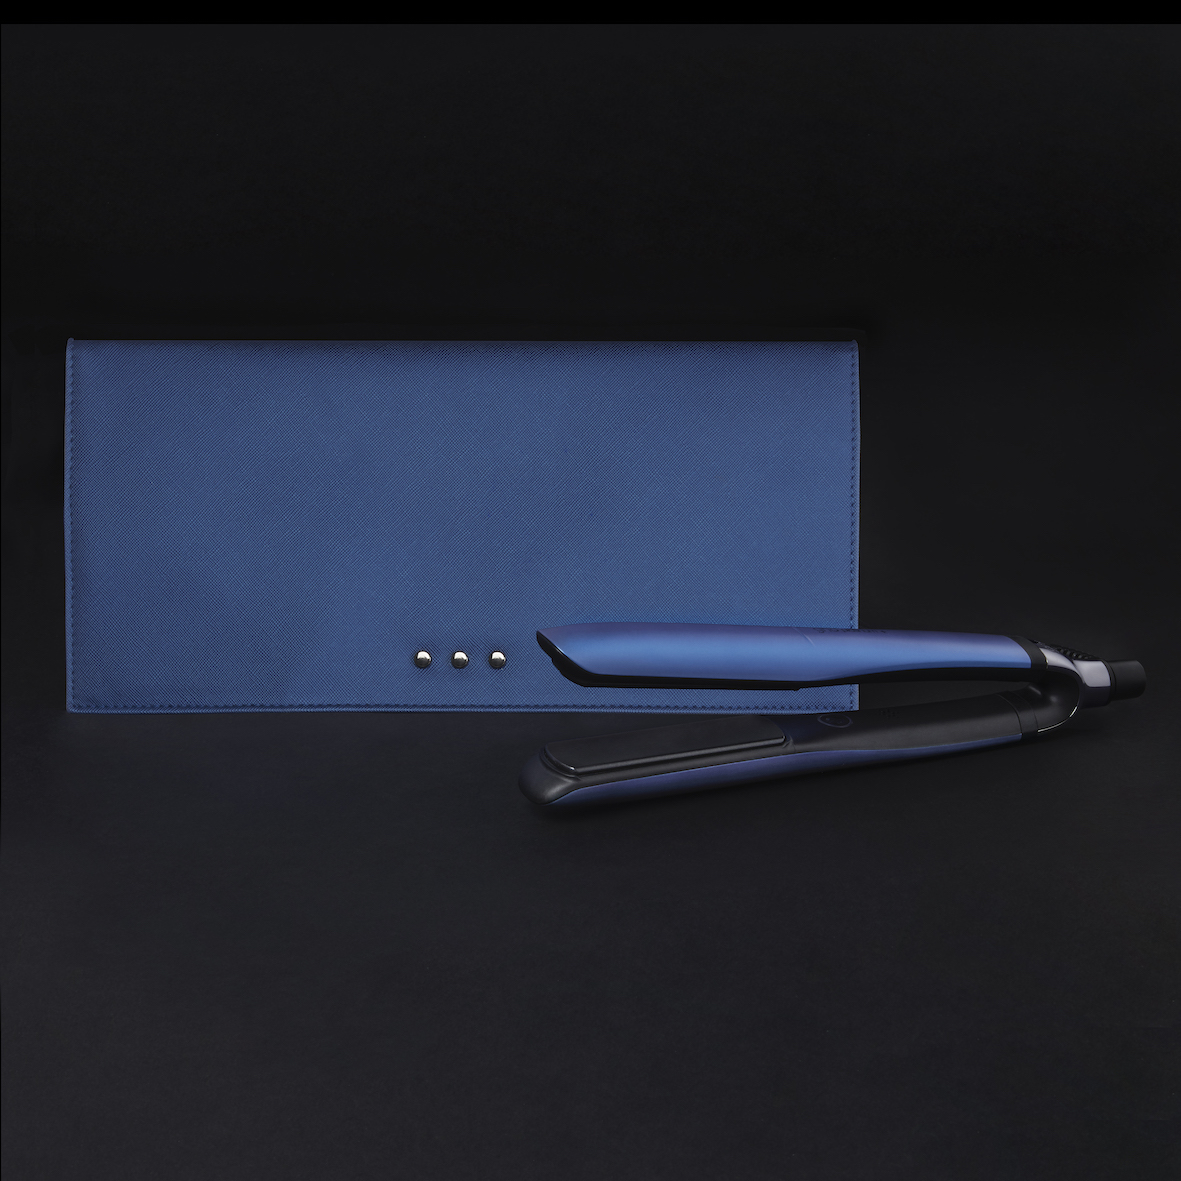 ghd Upbeat Collection platinum+ styler_Campaign Imagery_Cobalt Blue (1)